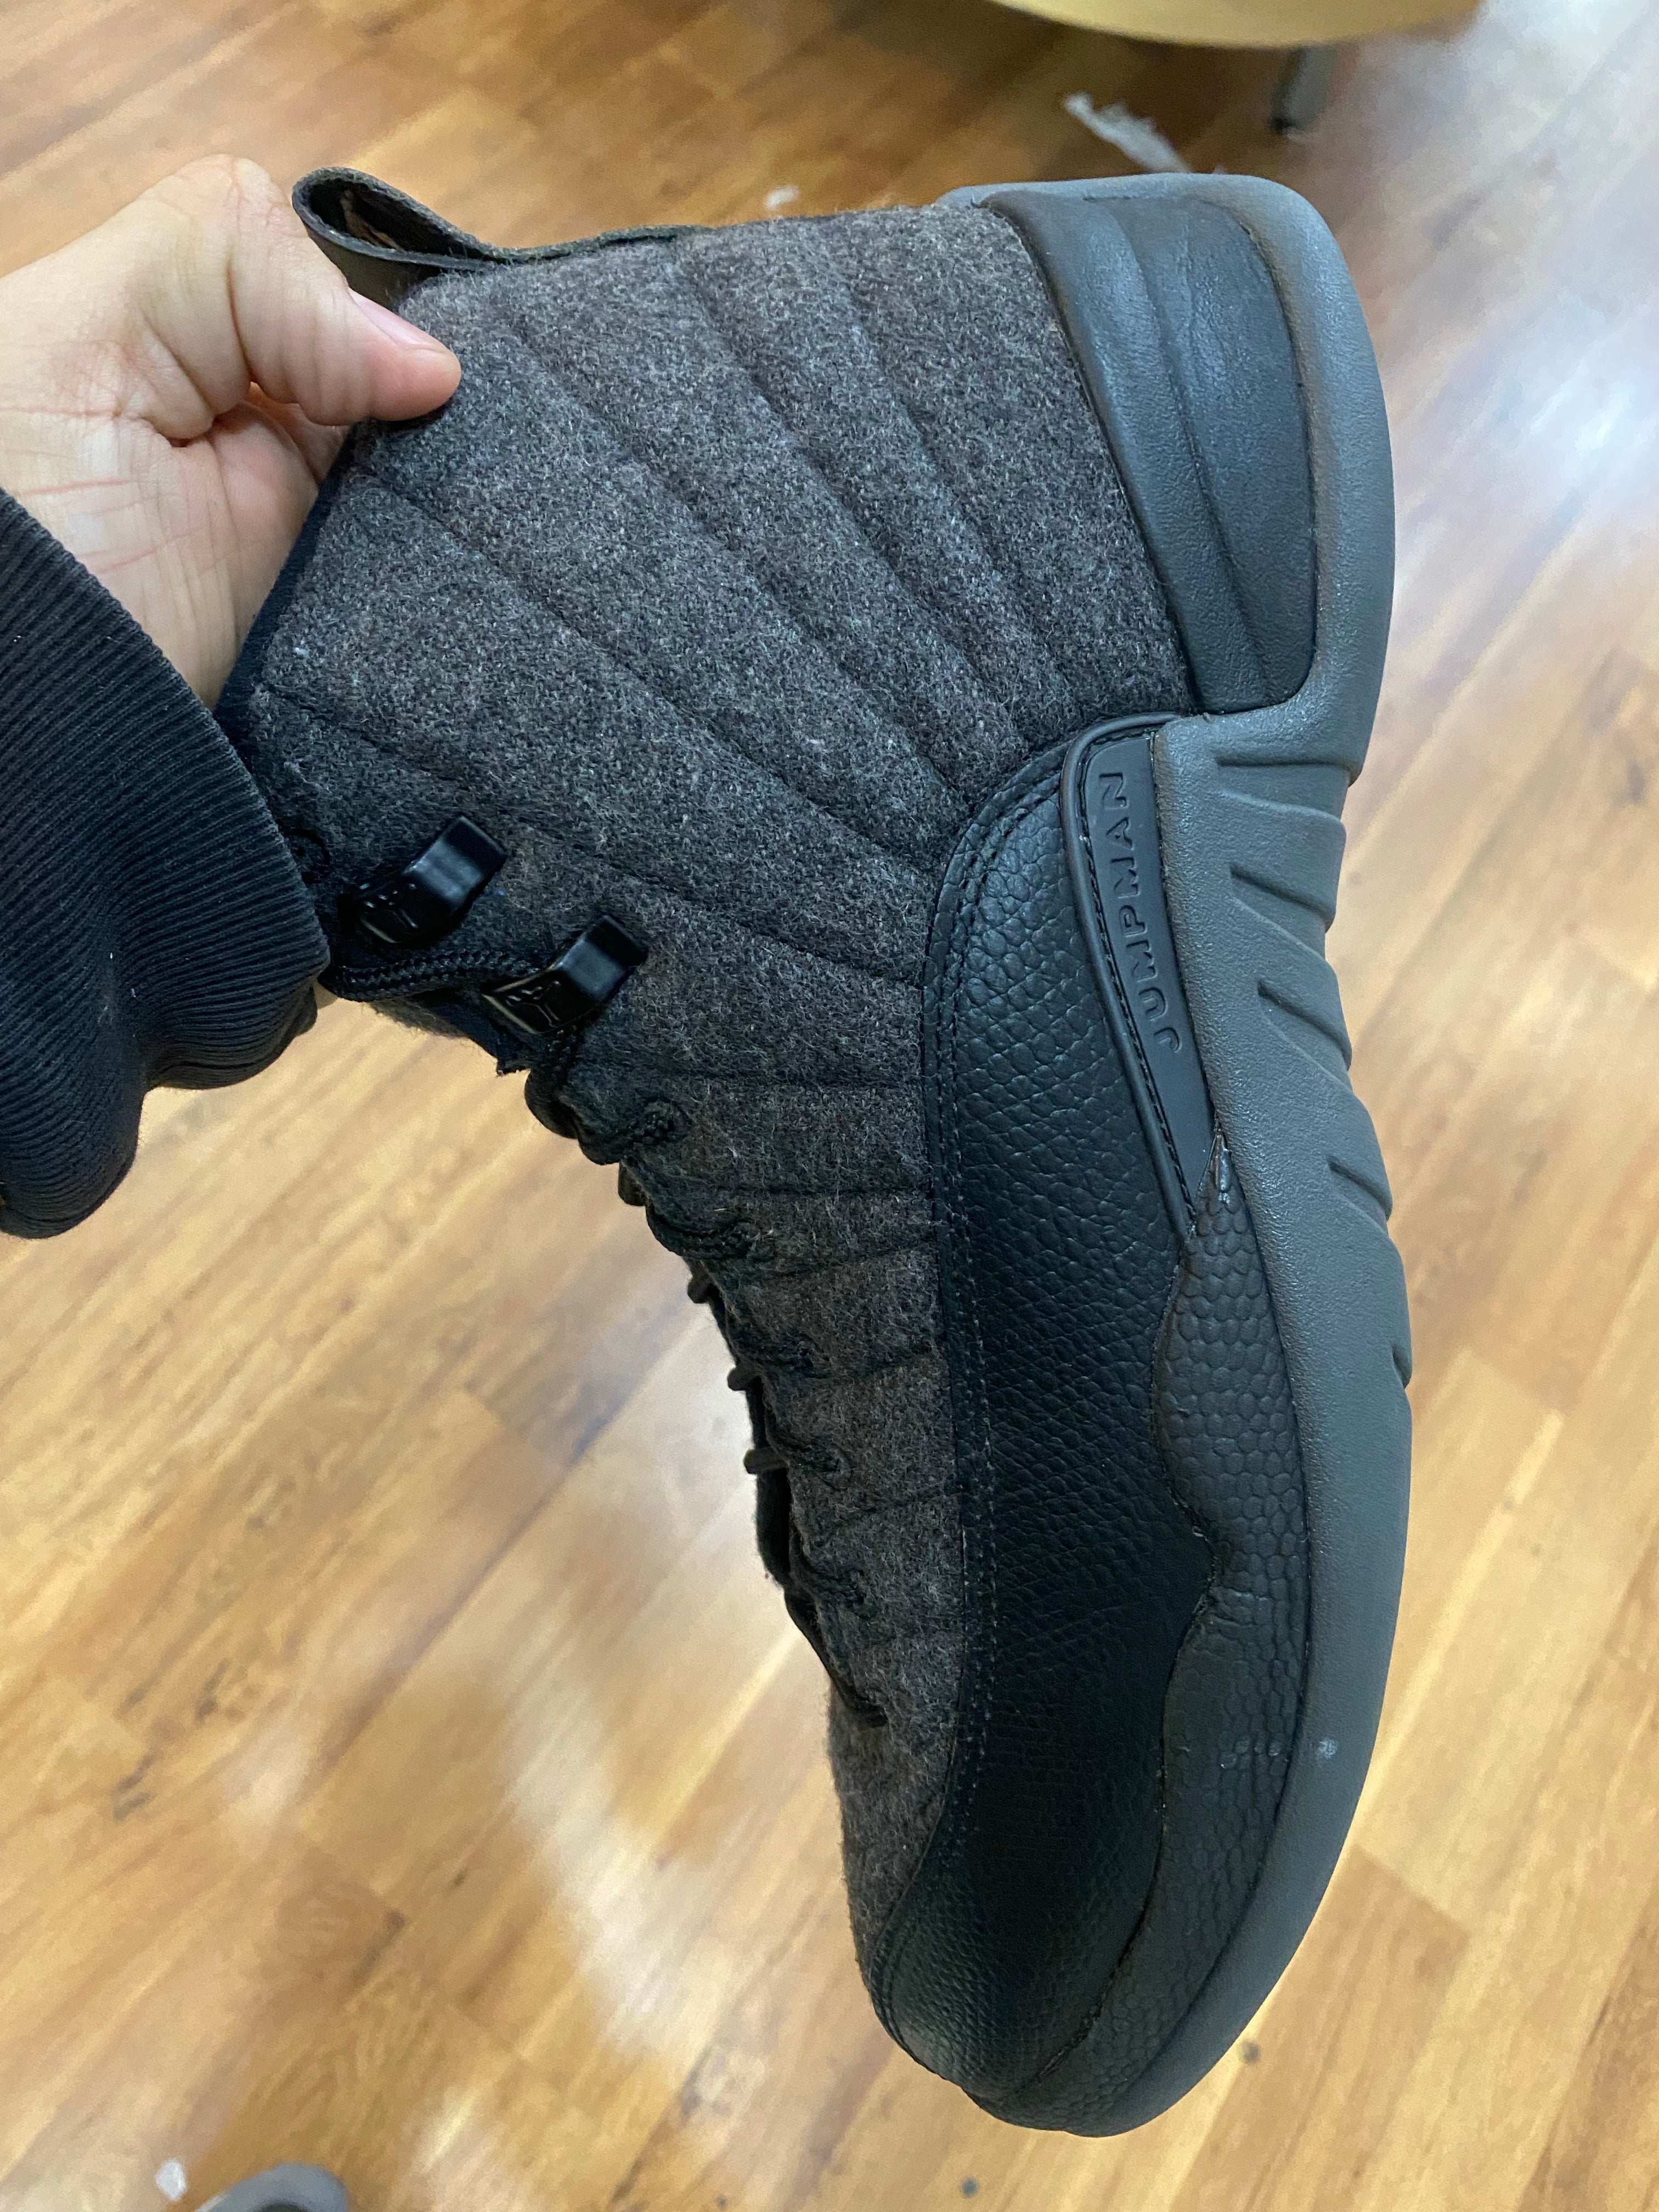 Wool 12s size 10.5